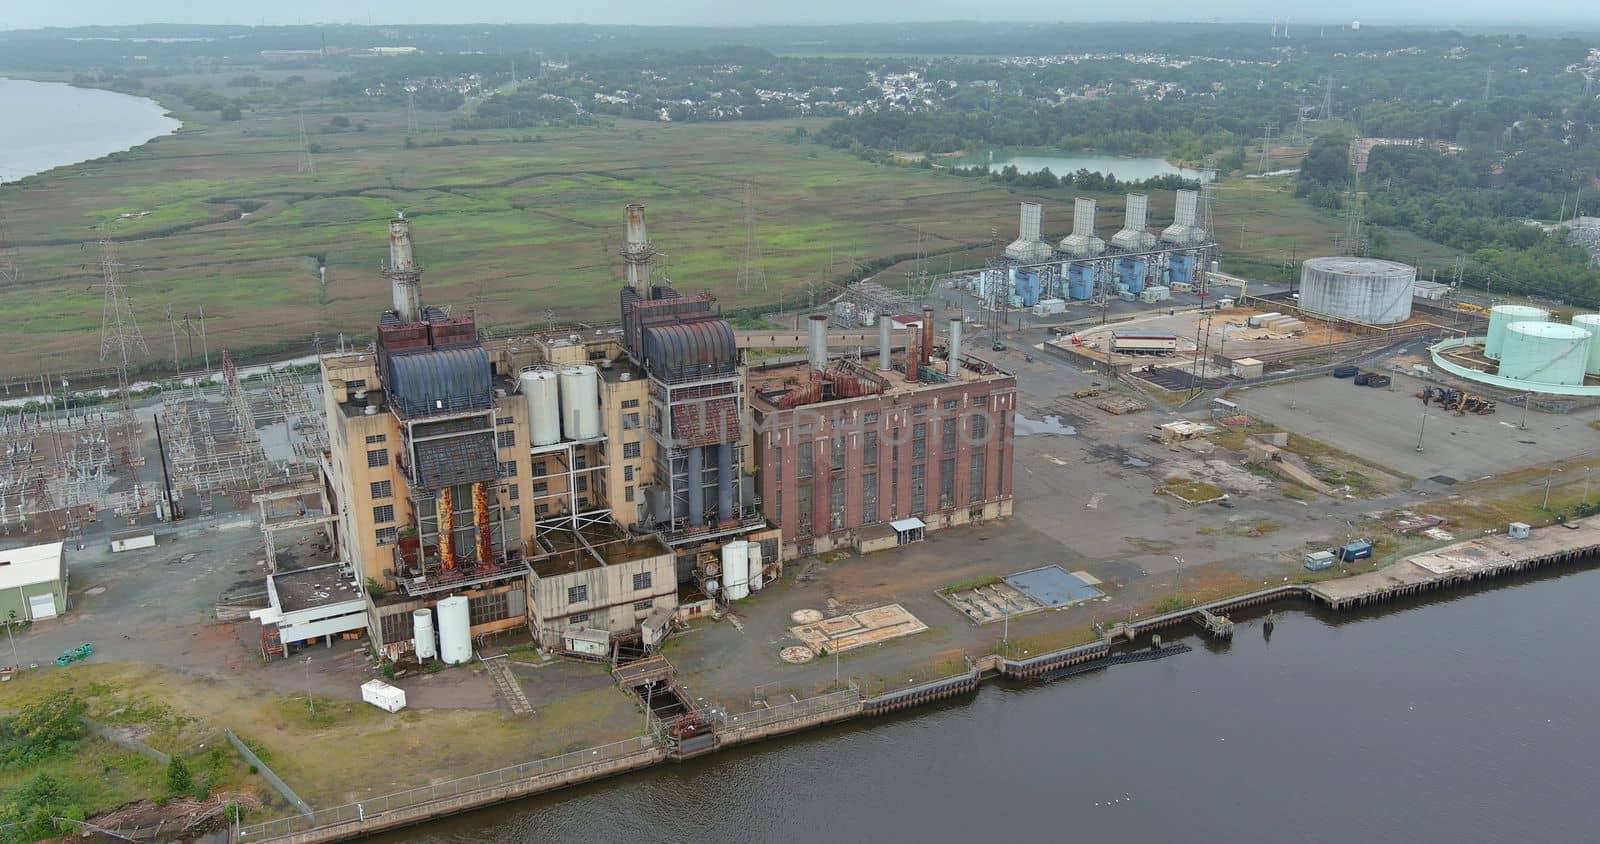 Old thermal power station located on coast of bay in process of being decommissioned